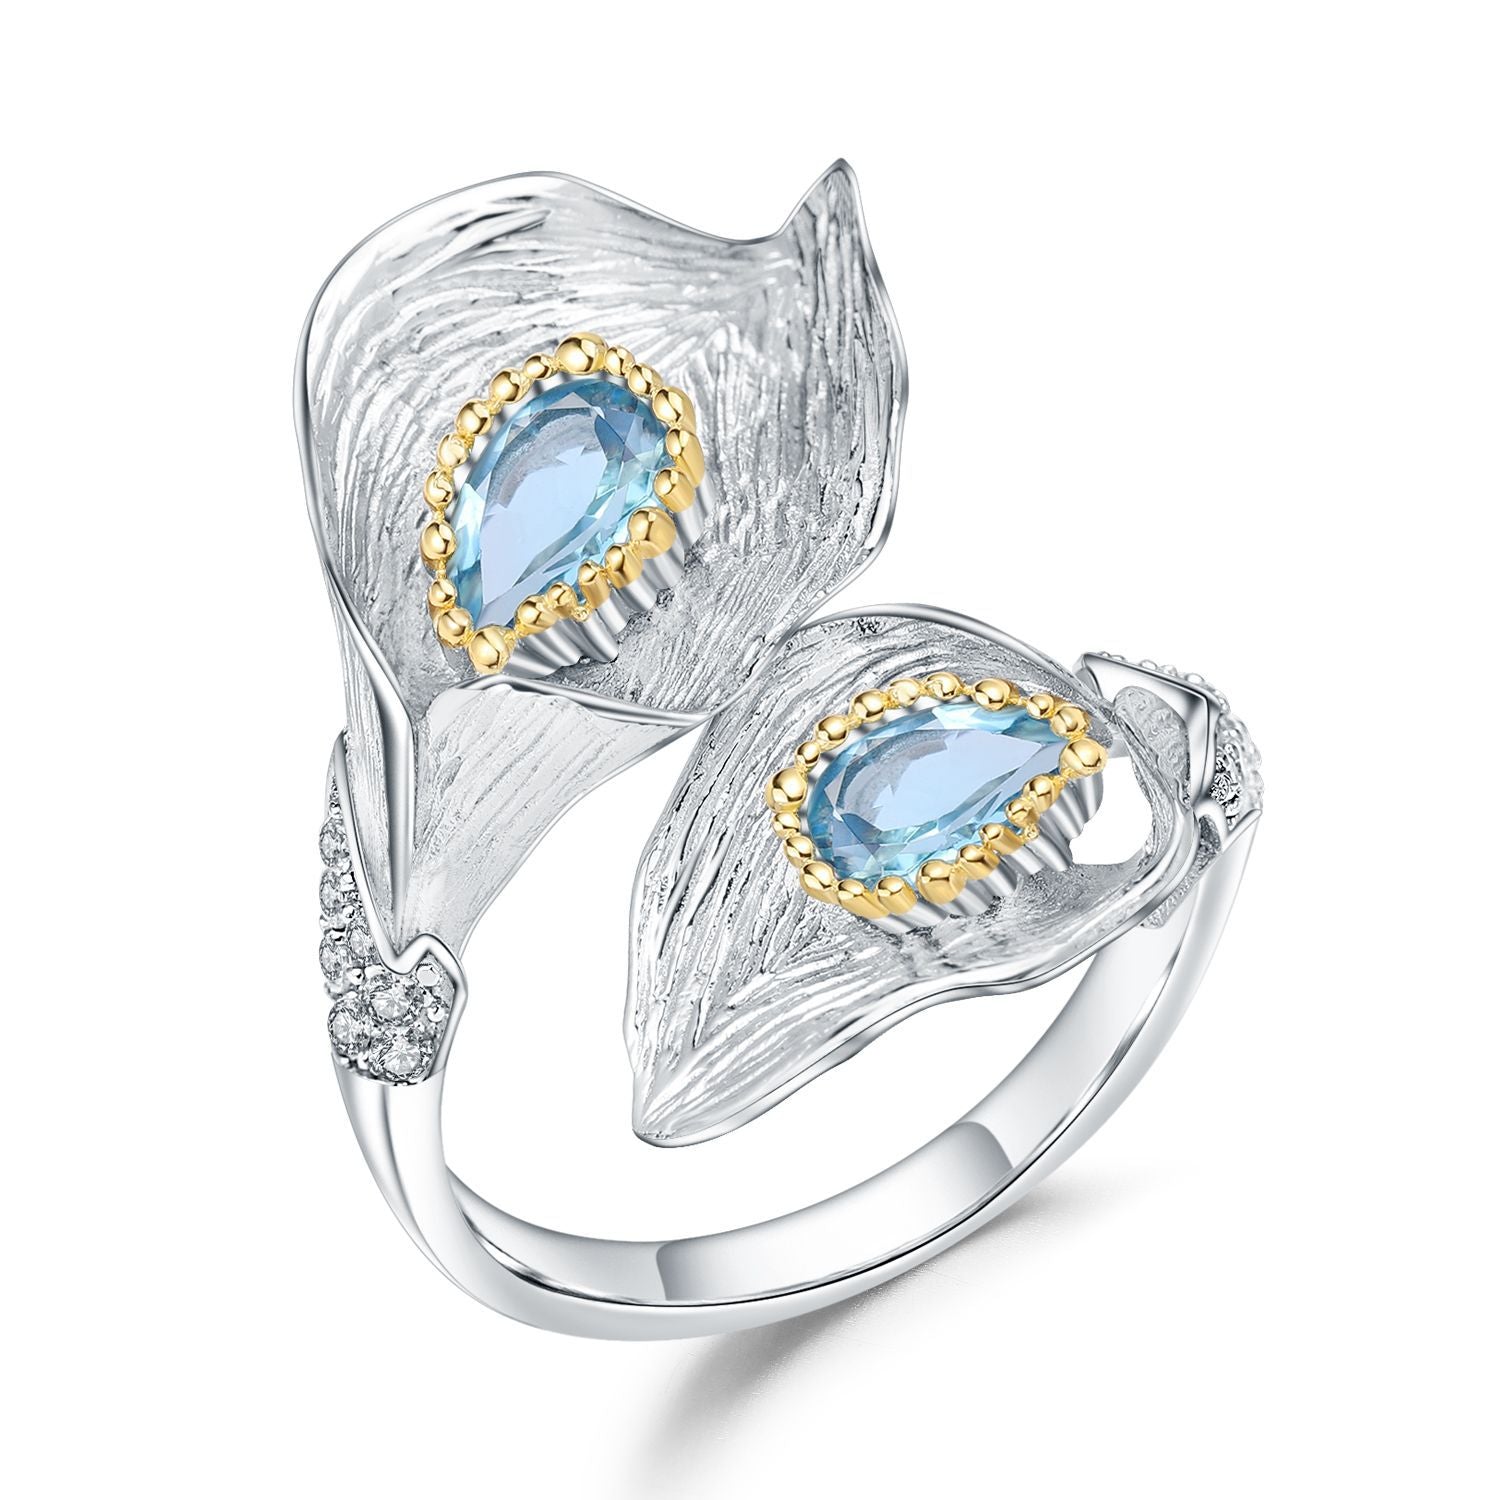 Antique Blue Topaz Ring - HERS